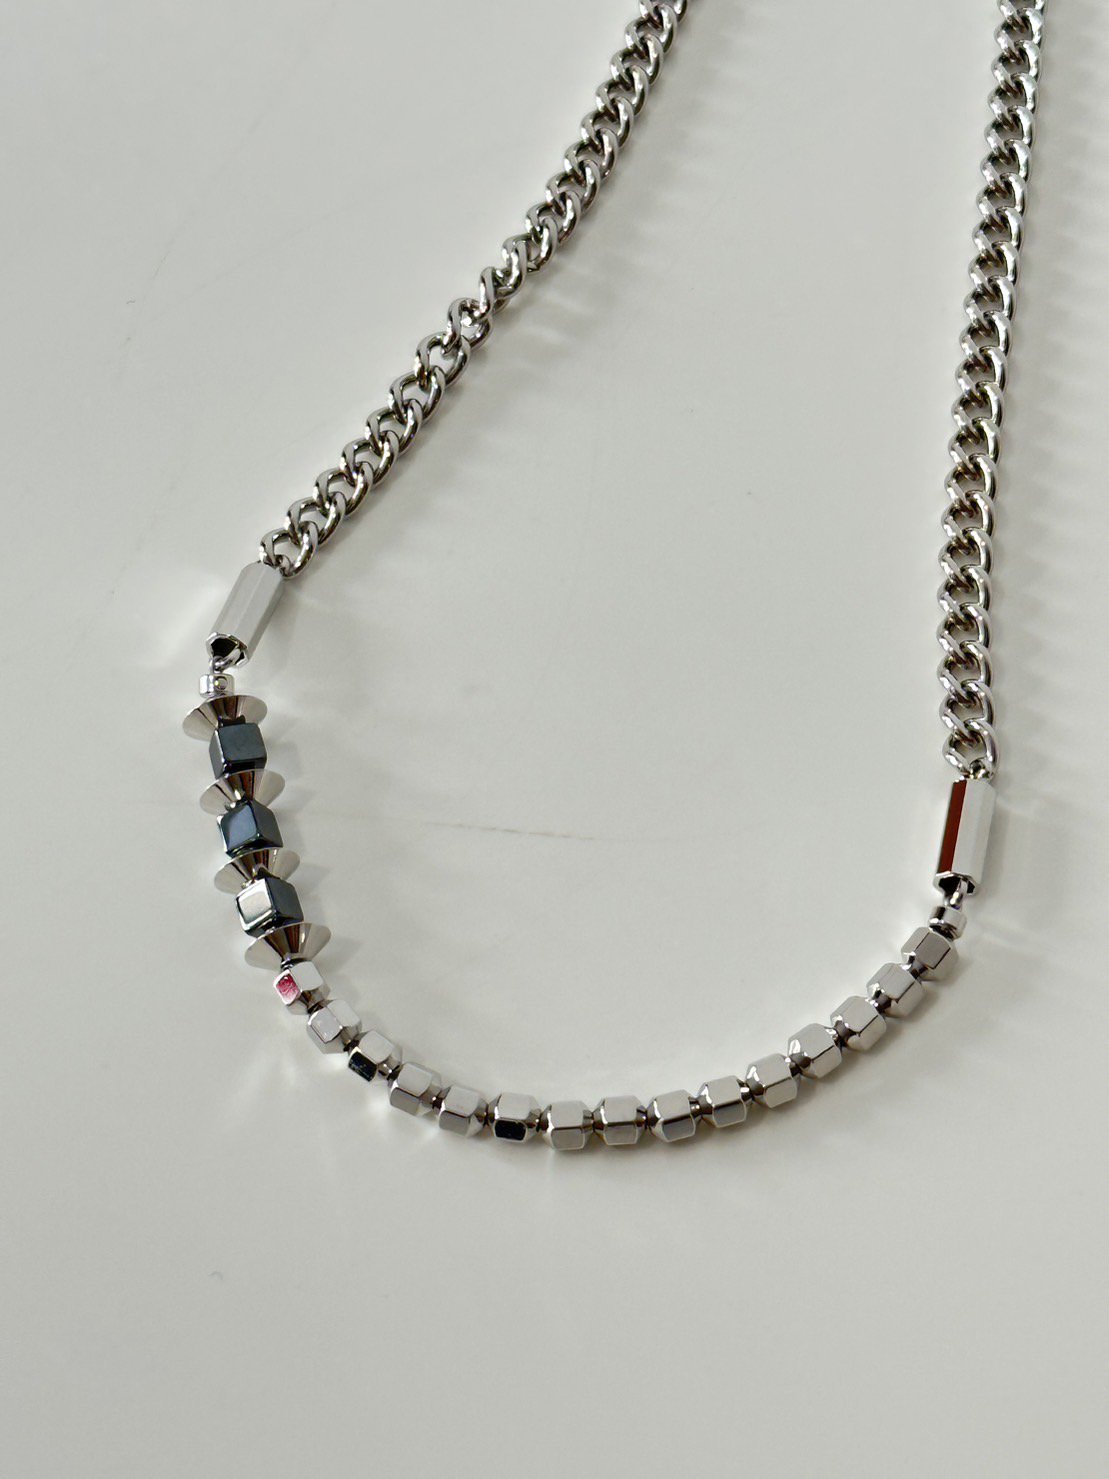 JieDa<br />HEMATITE NECKLACE / SILVER<img class='new_mark_img2' src='https://img.shop-pro.jp/img/new/icons47.gif' style='border:none;display:inline;margin:0px;padding:0px;width:auto;' />